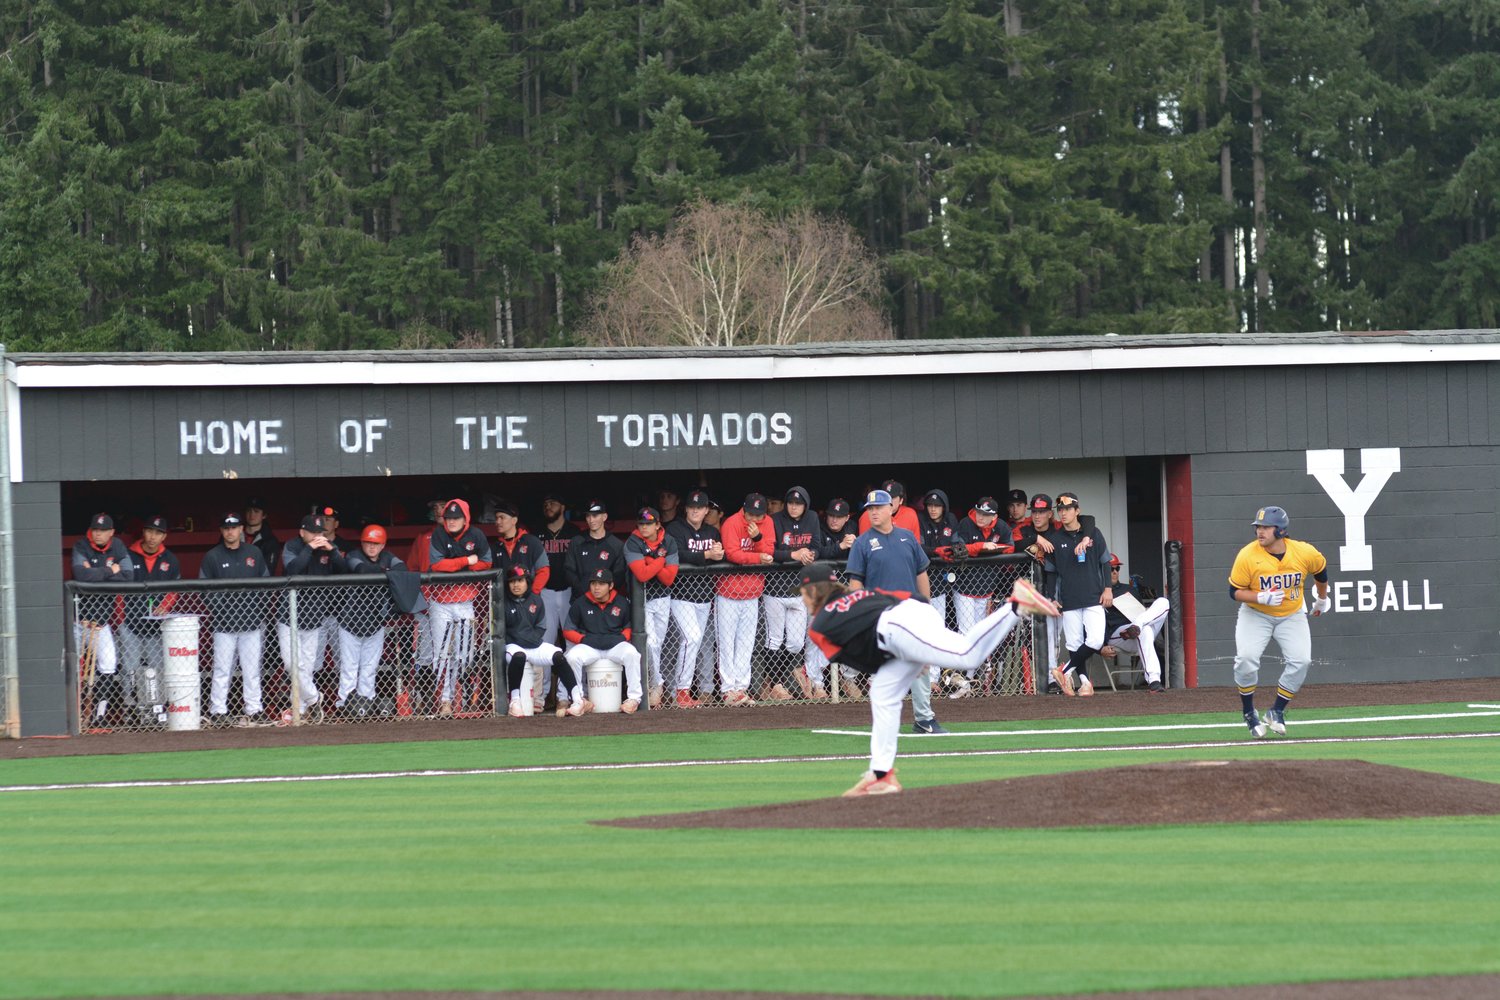 Kameron Richards delivers a pitch against Montana State Billings at Yelm High School on March 18.